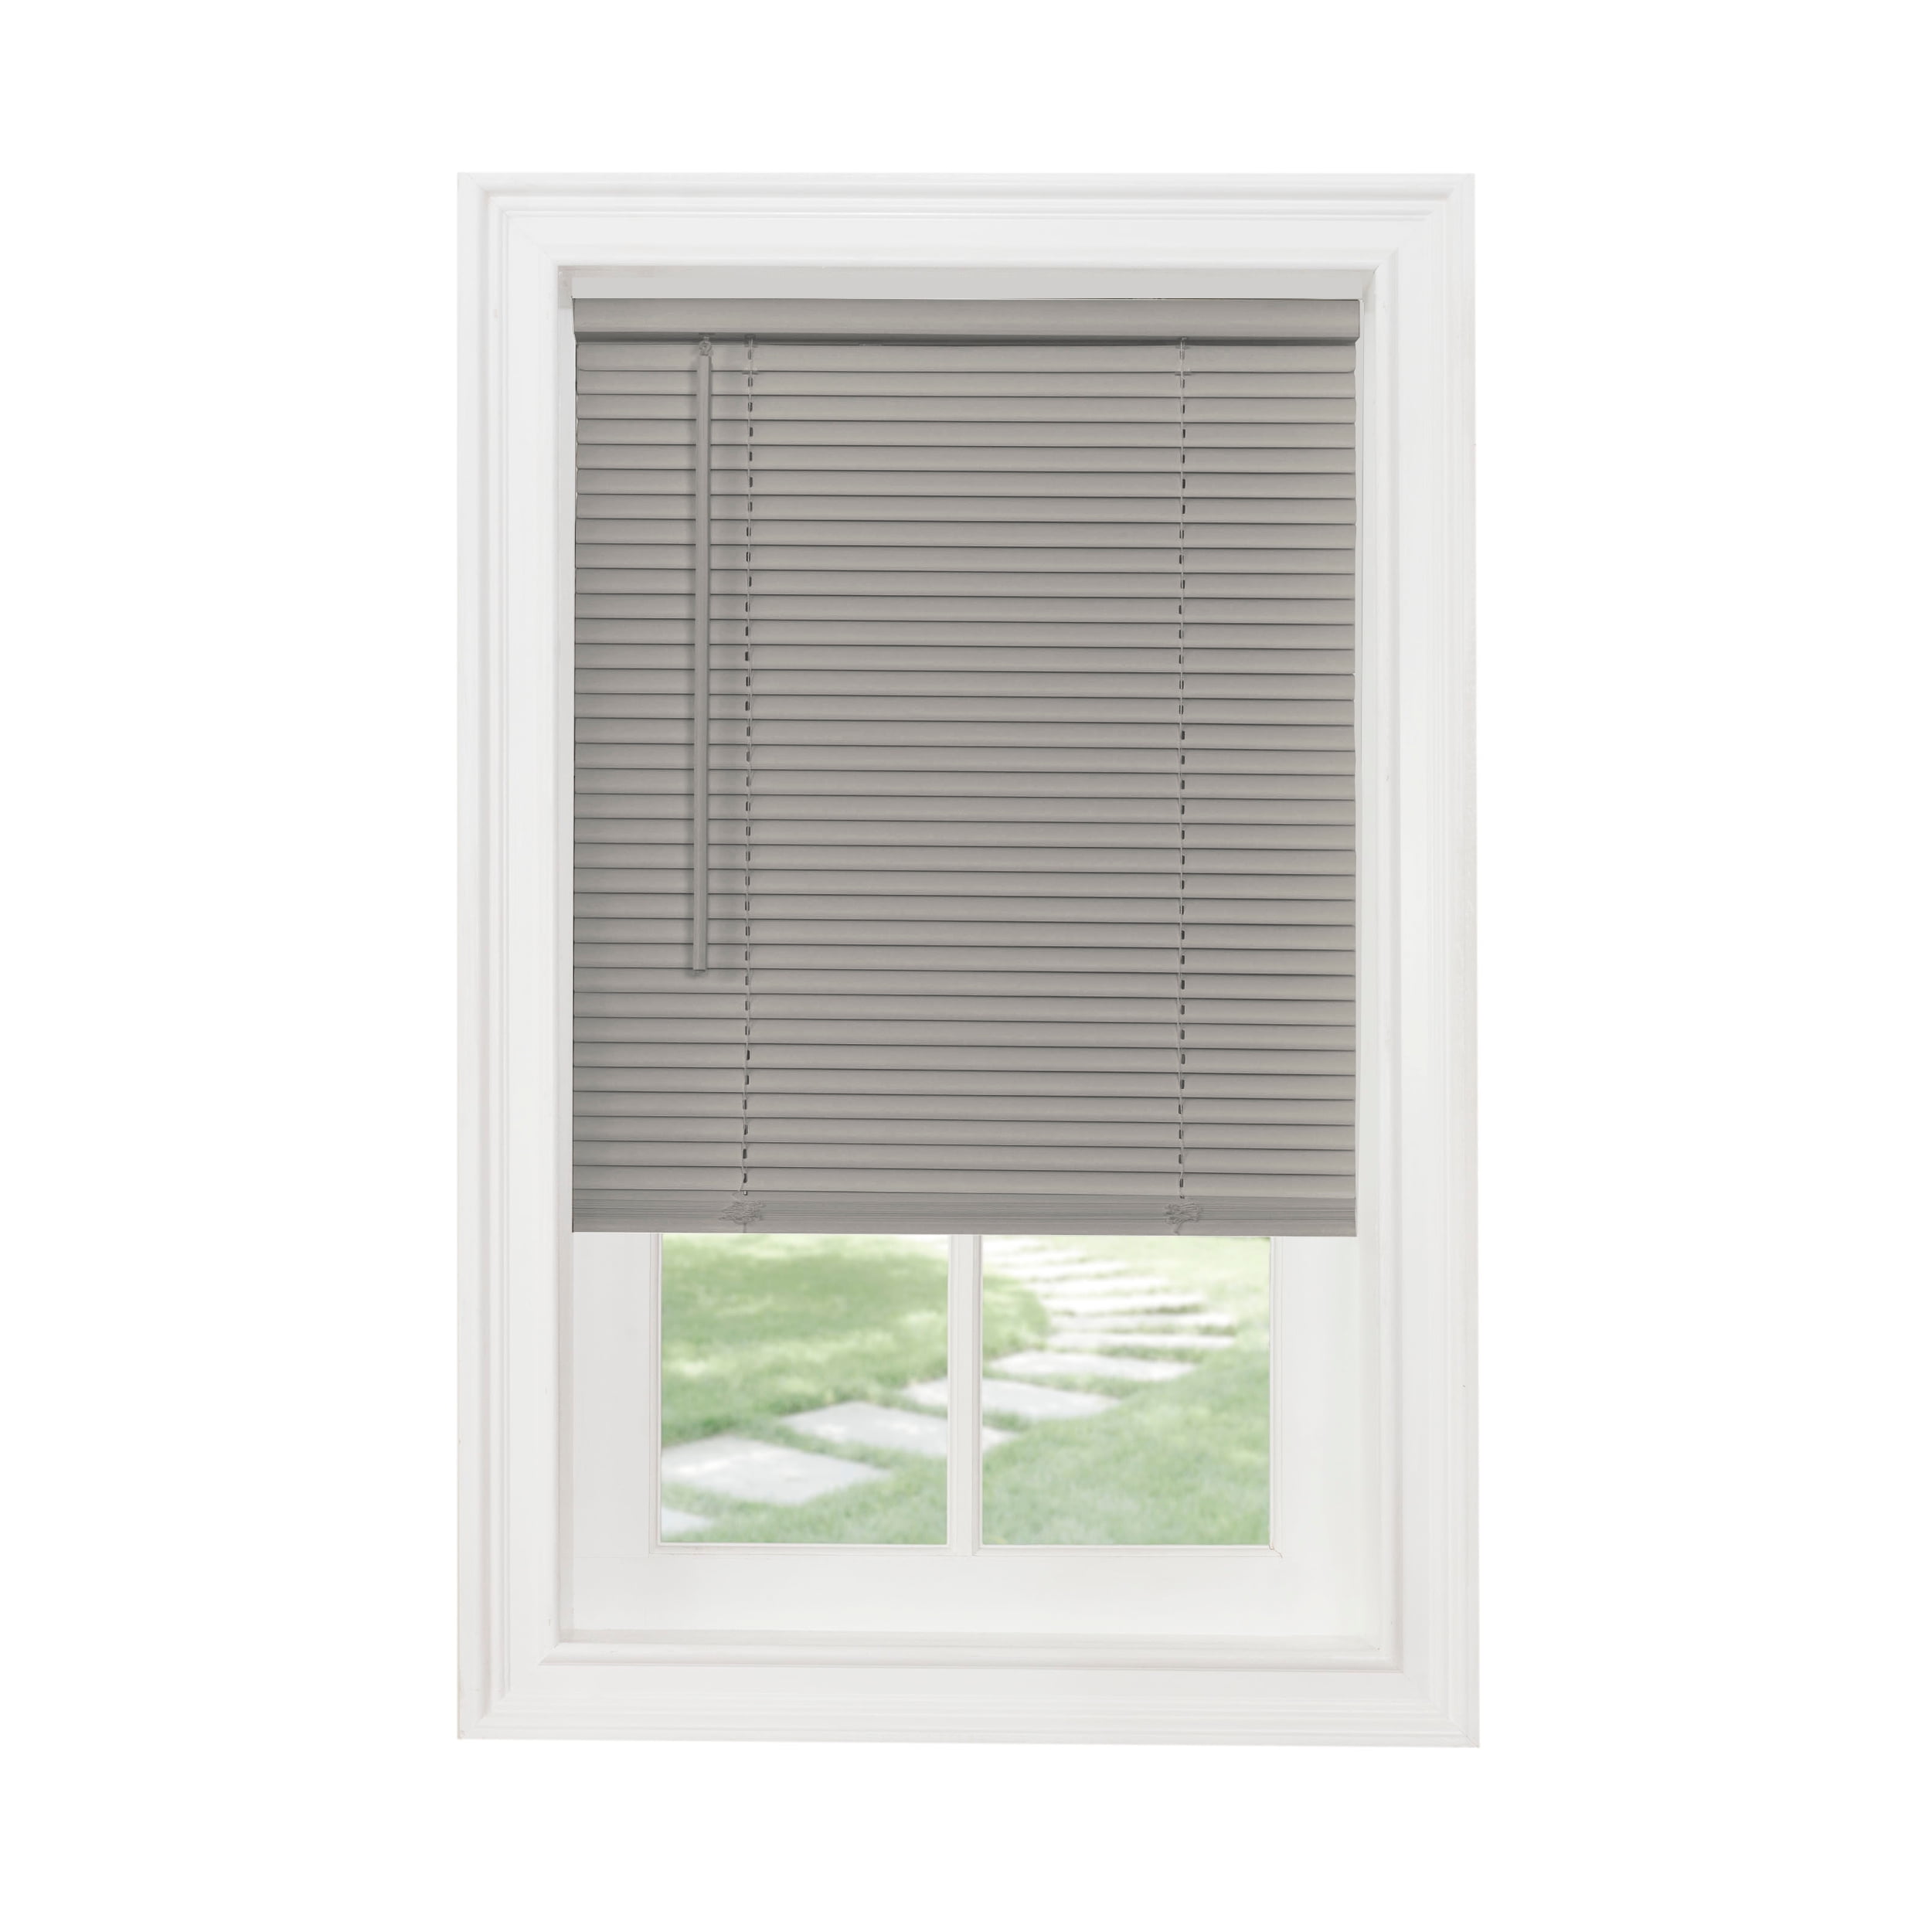 Picture of Achim MSG231GY06 31 x 64 in. GII Morningstar Cordless Light Filtering Vinyl Mini Blinds with 1 in. Slats, Grey